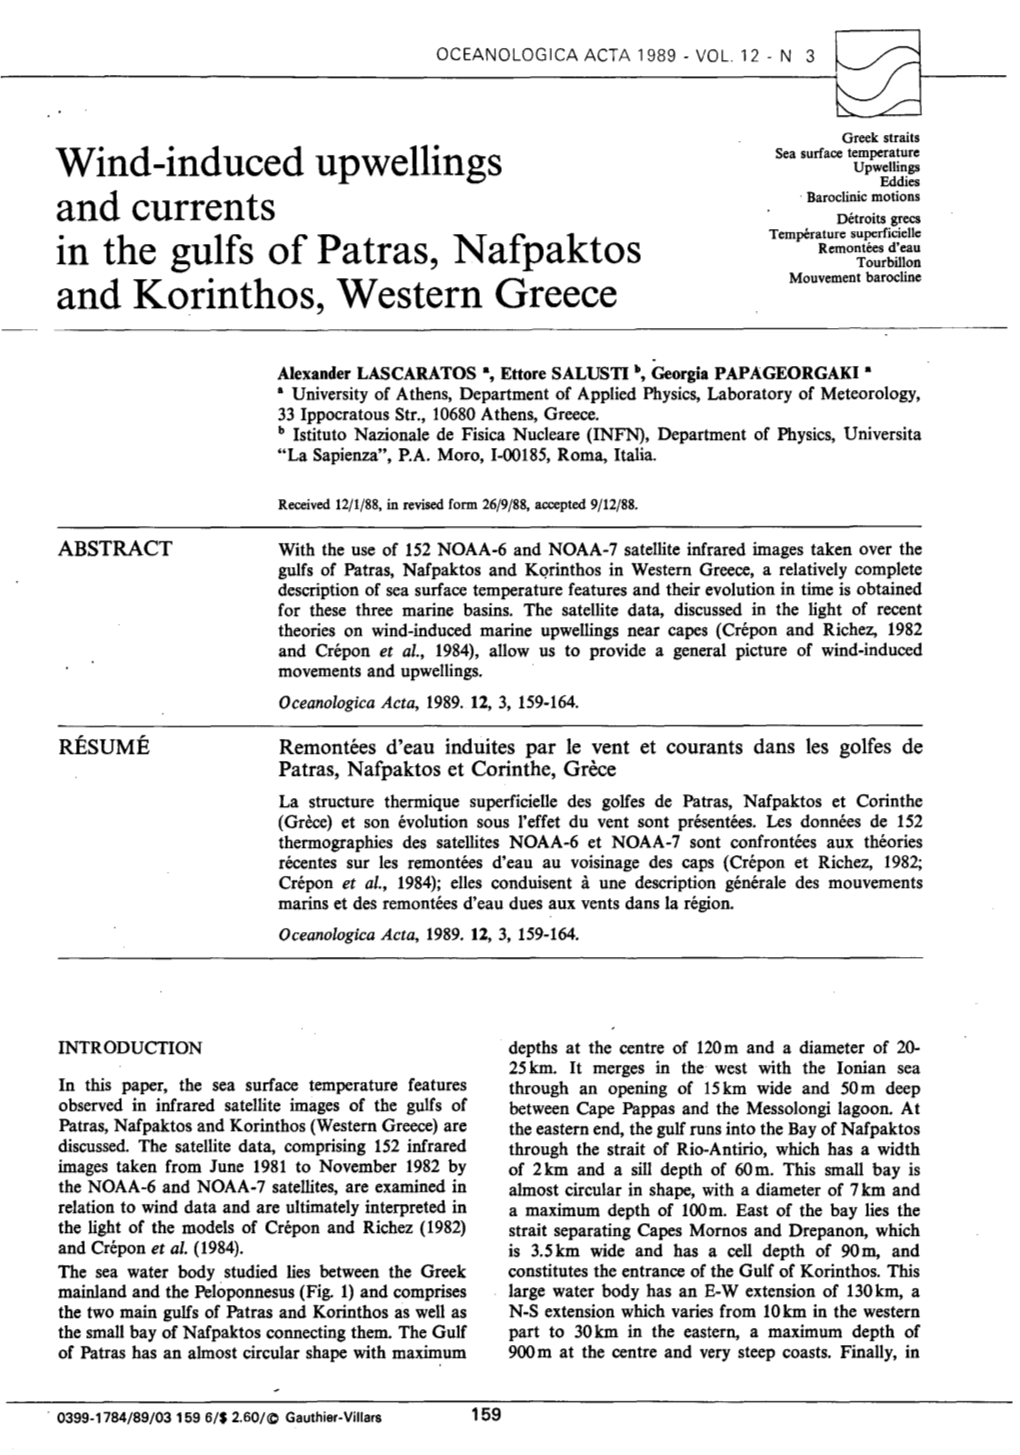 Wind-Induced Upwellings and Currents in the Gulfs of Patras, Nafpaktos and Korinthos, Western Greece